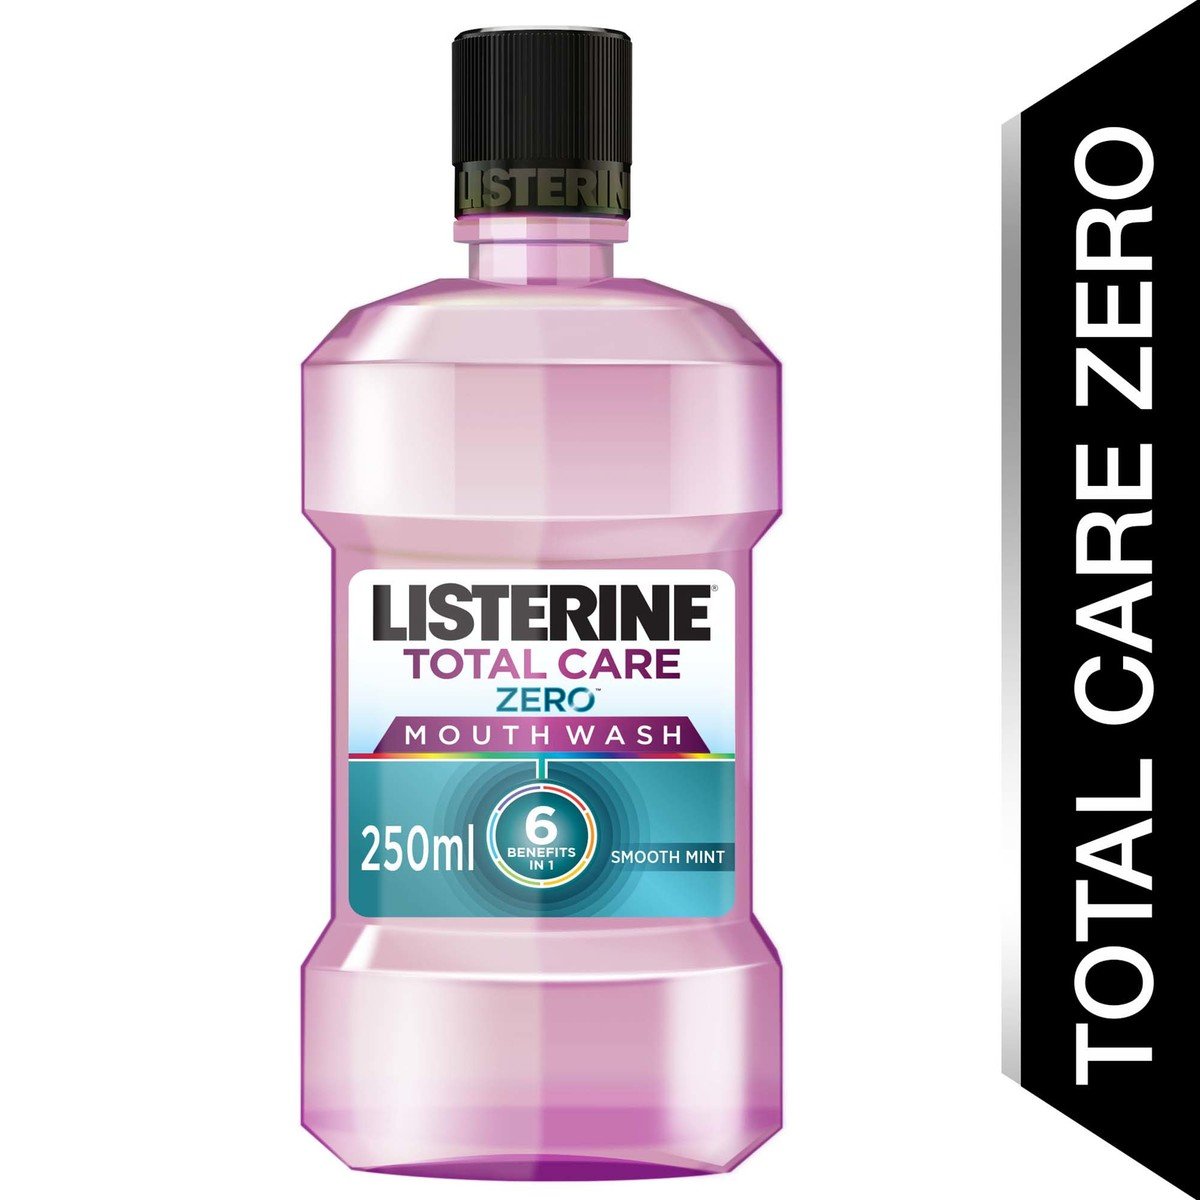 Listerine Mouthwash Total Care Zero Alcohol Smooth Mint 250ml